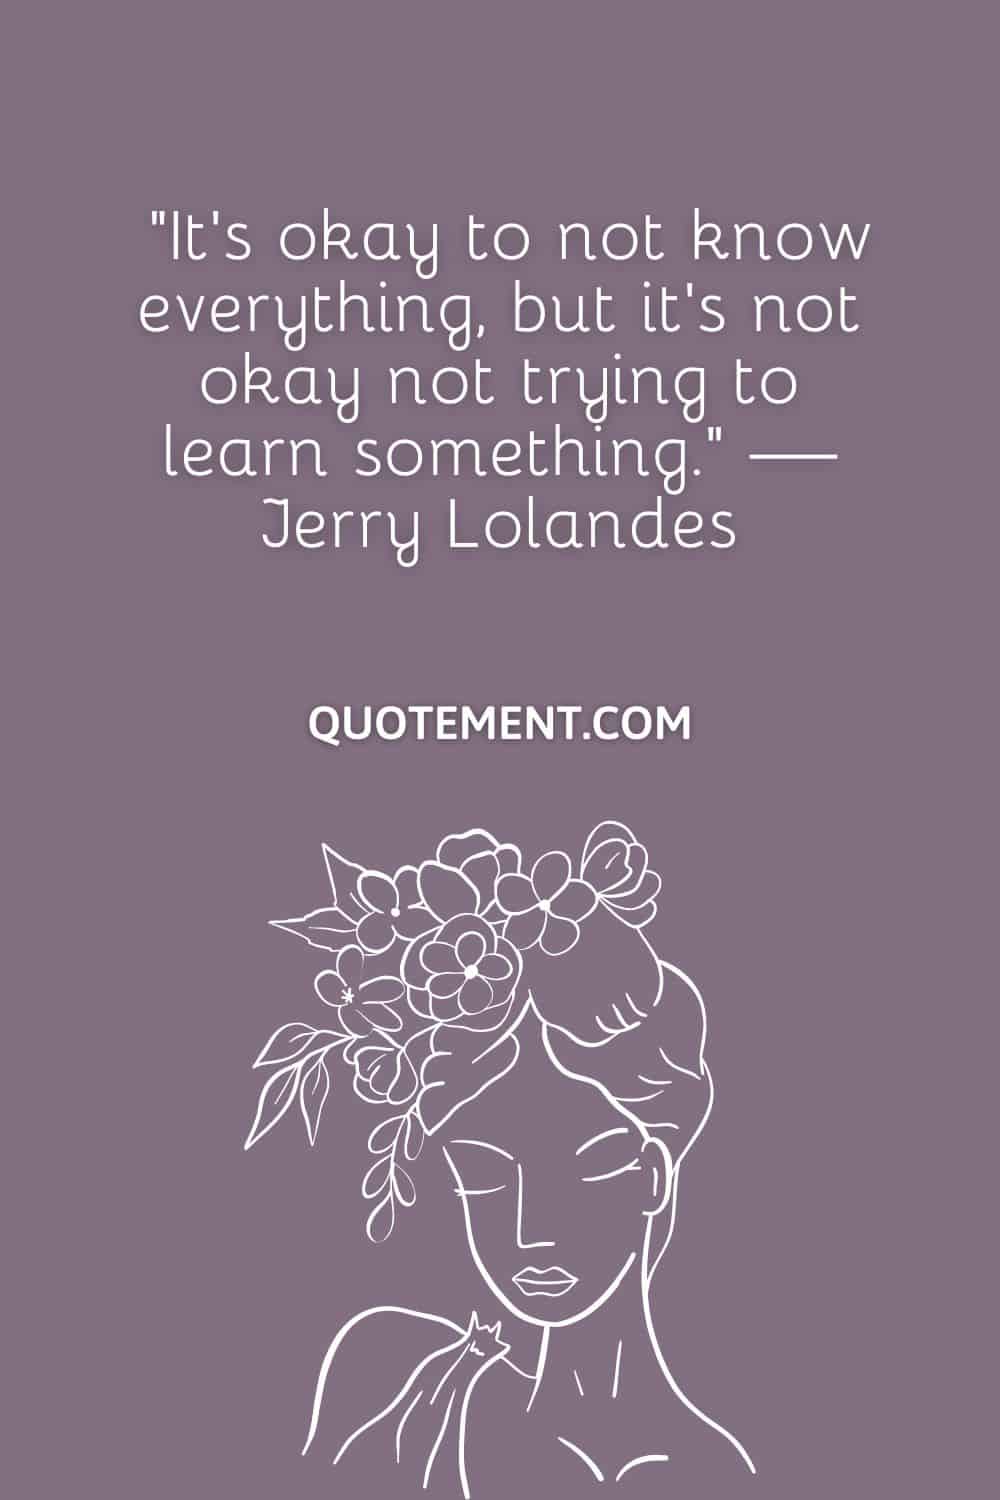 It’s okay to not know everything, but it’s not okay not trying to learn something.